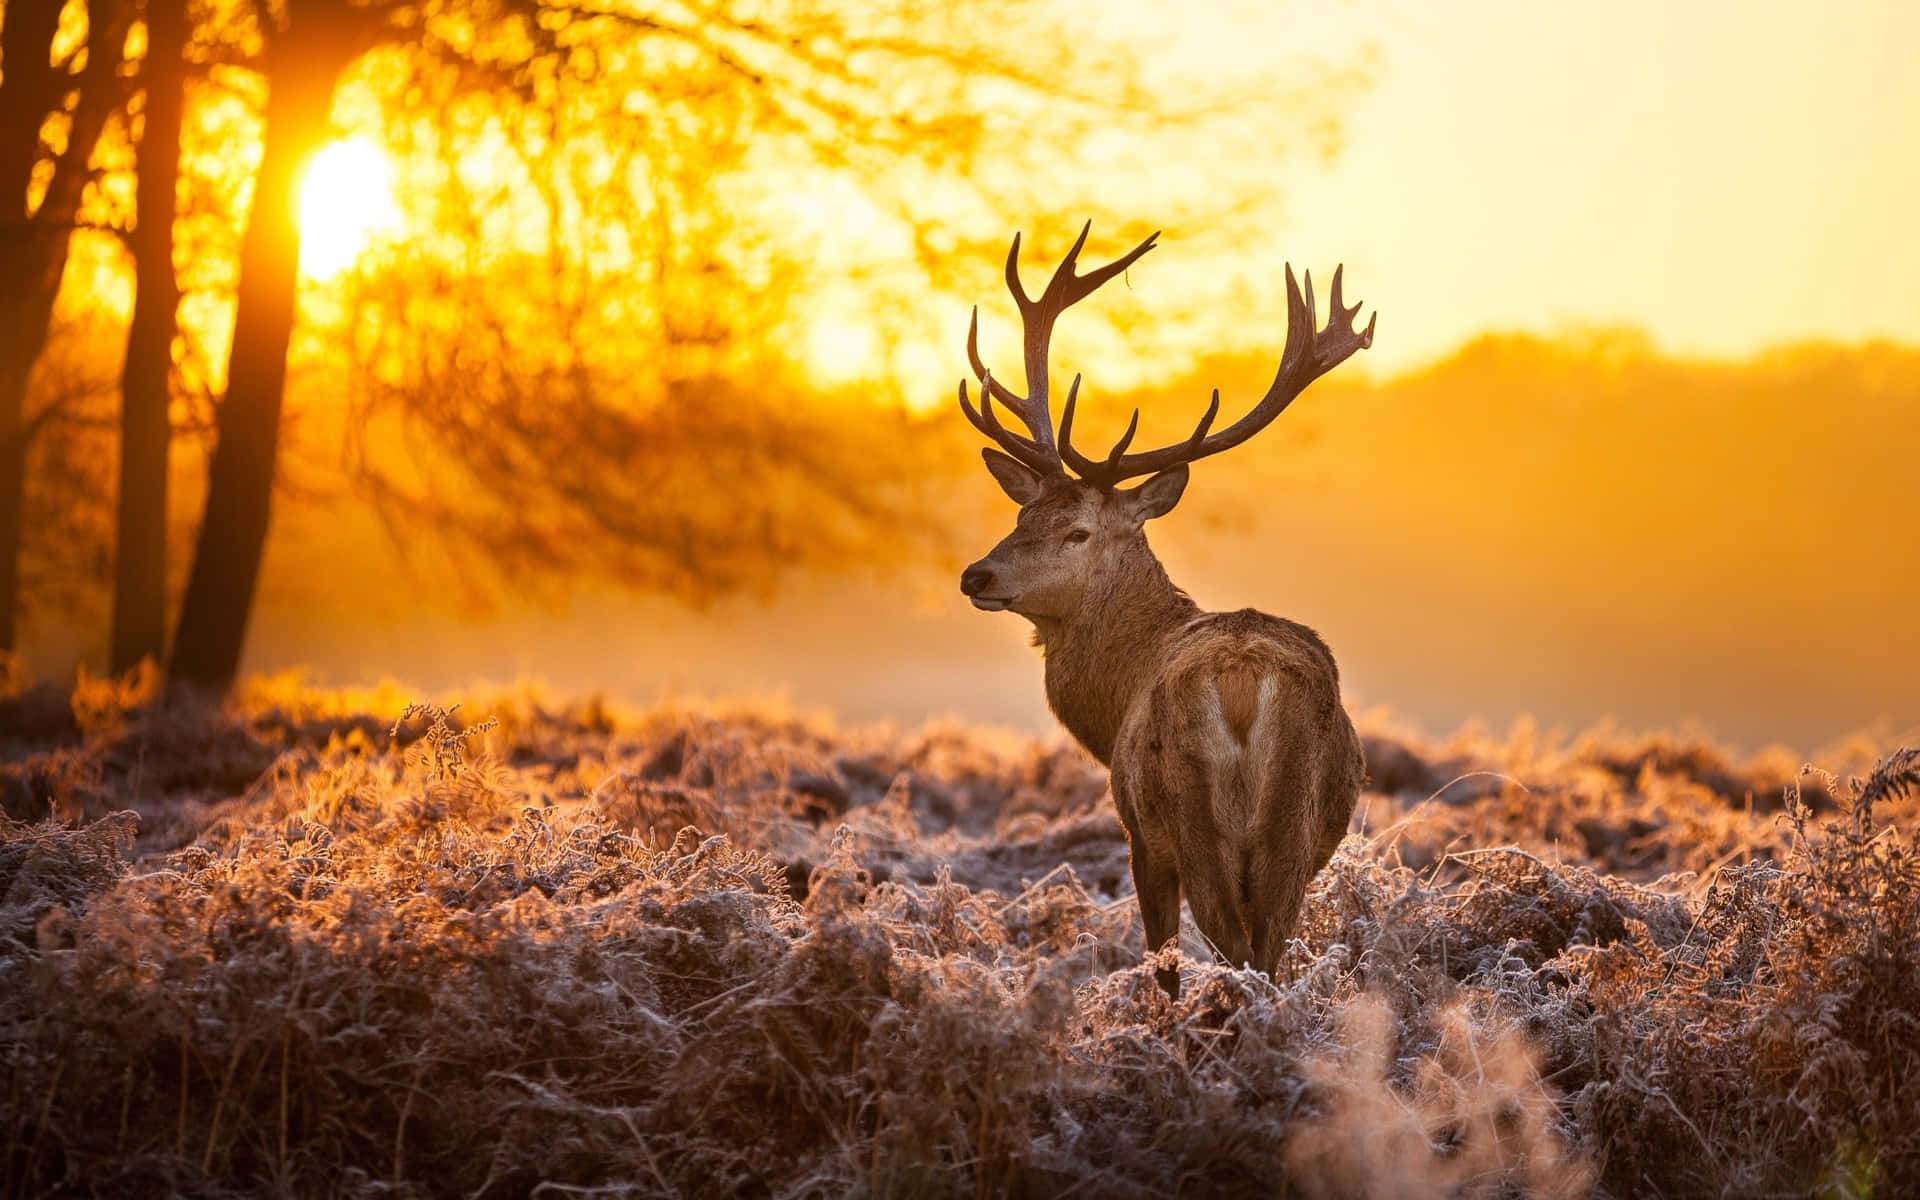 Majestic Deer Enjoying a Sunny Day in the Mountains Wallpaper